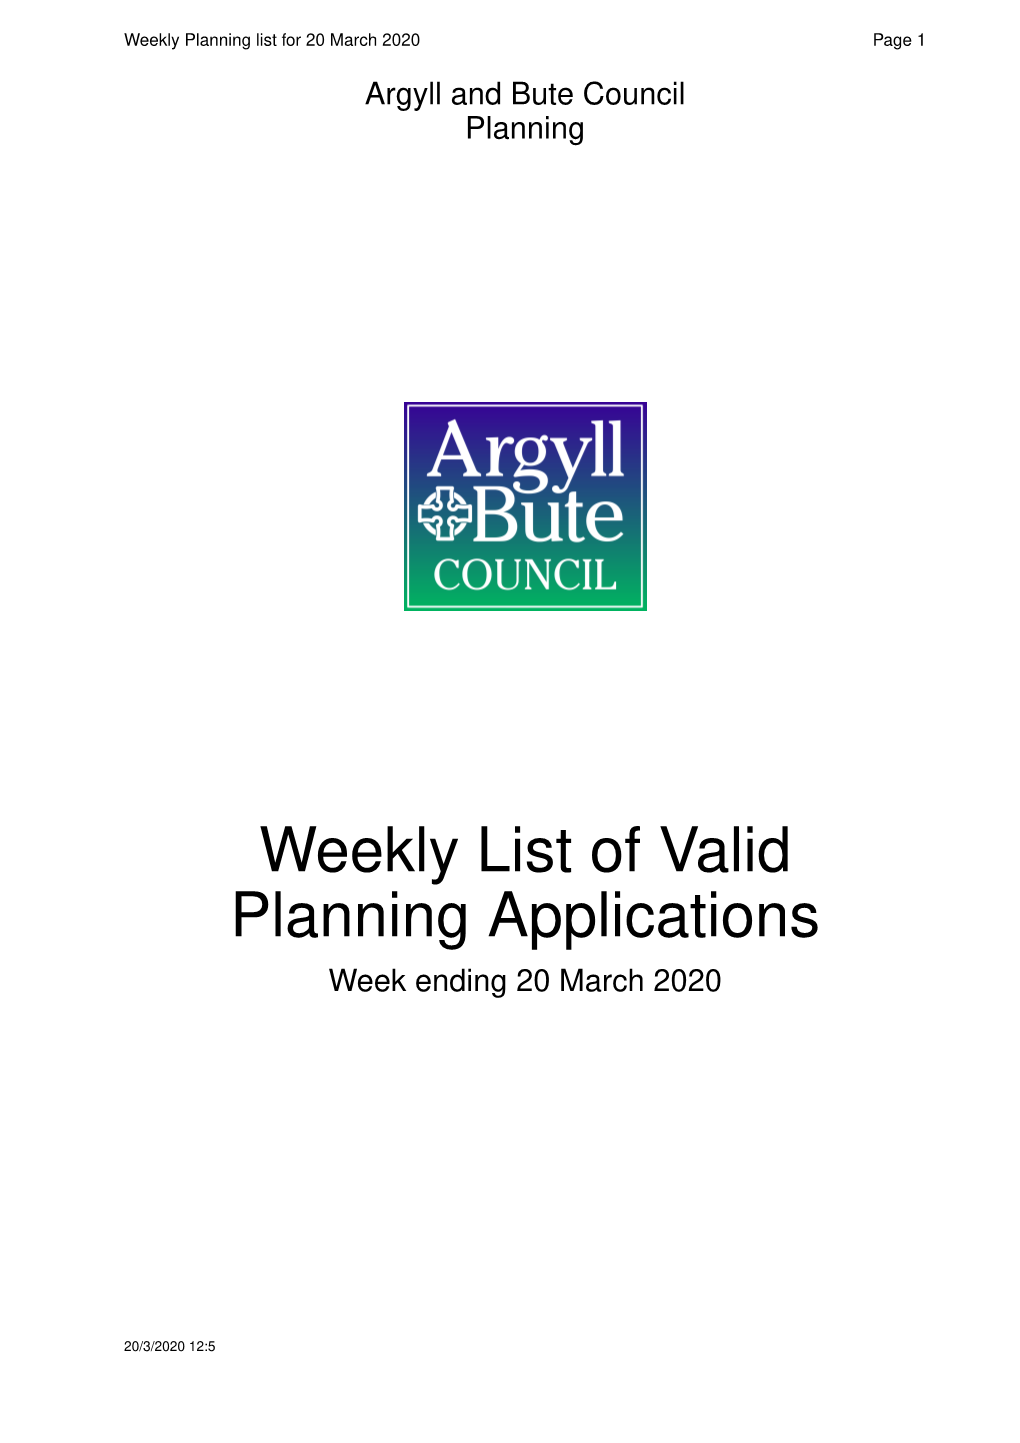 Weekly List of Valid Planning Applications 20Th March 2020.Pdf